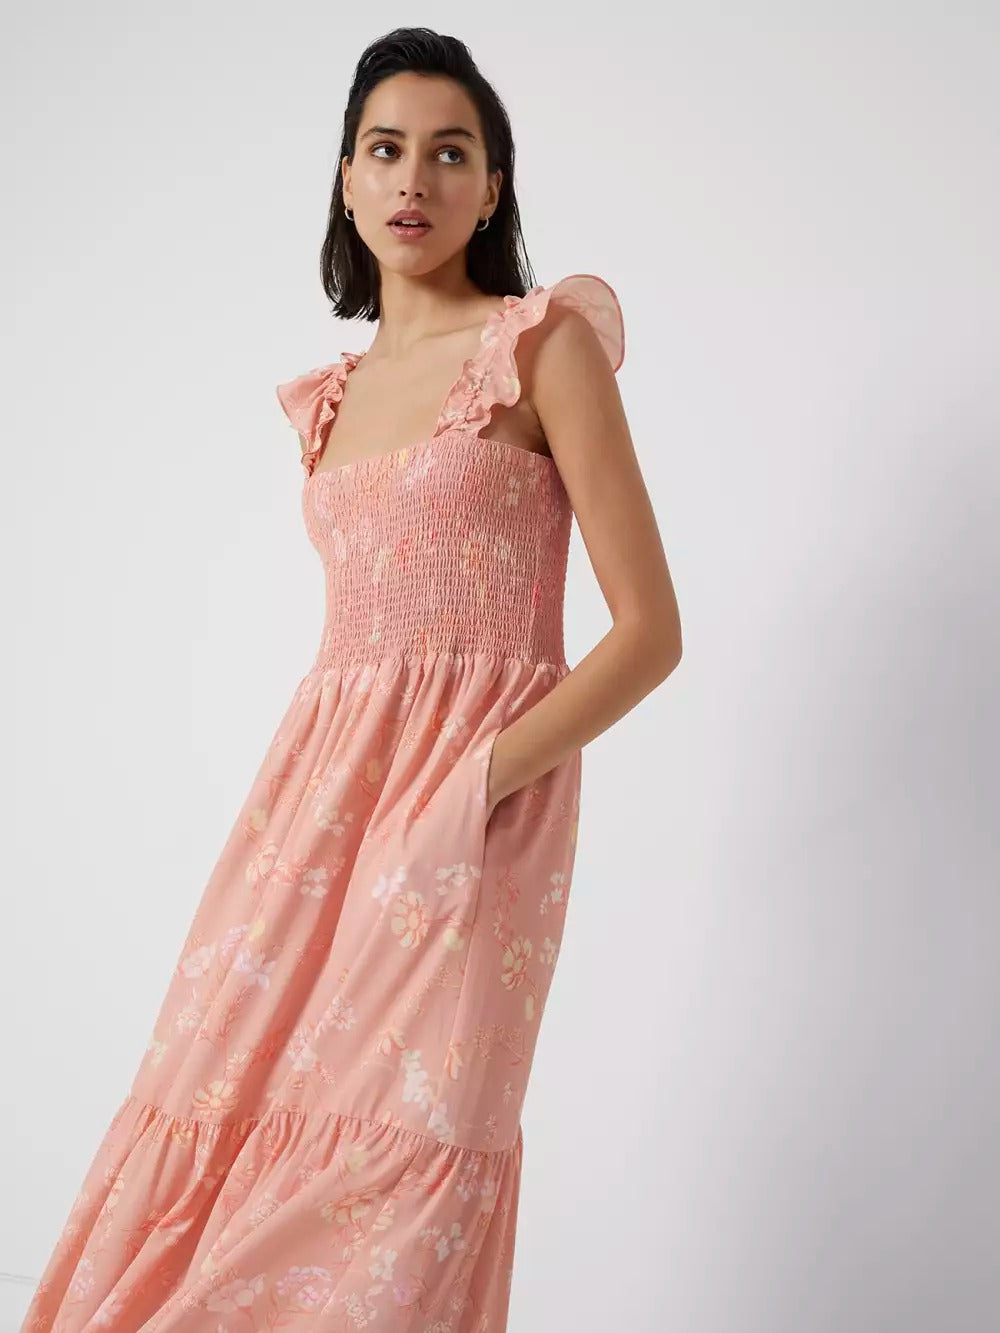 French Connection Diana Verona Drape Frill Dress Coral Pink product image